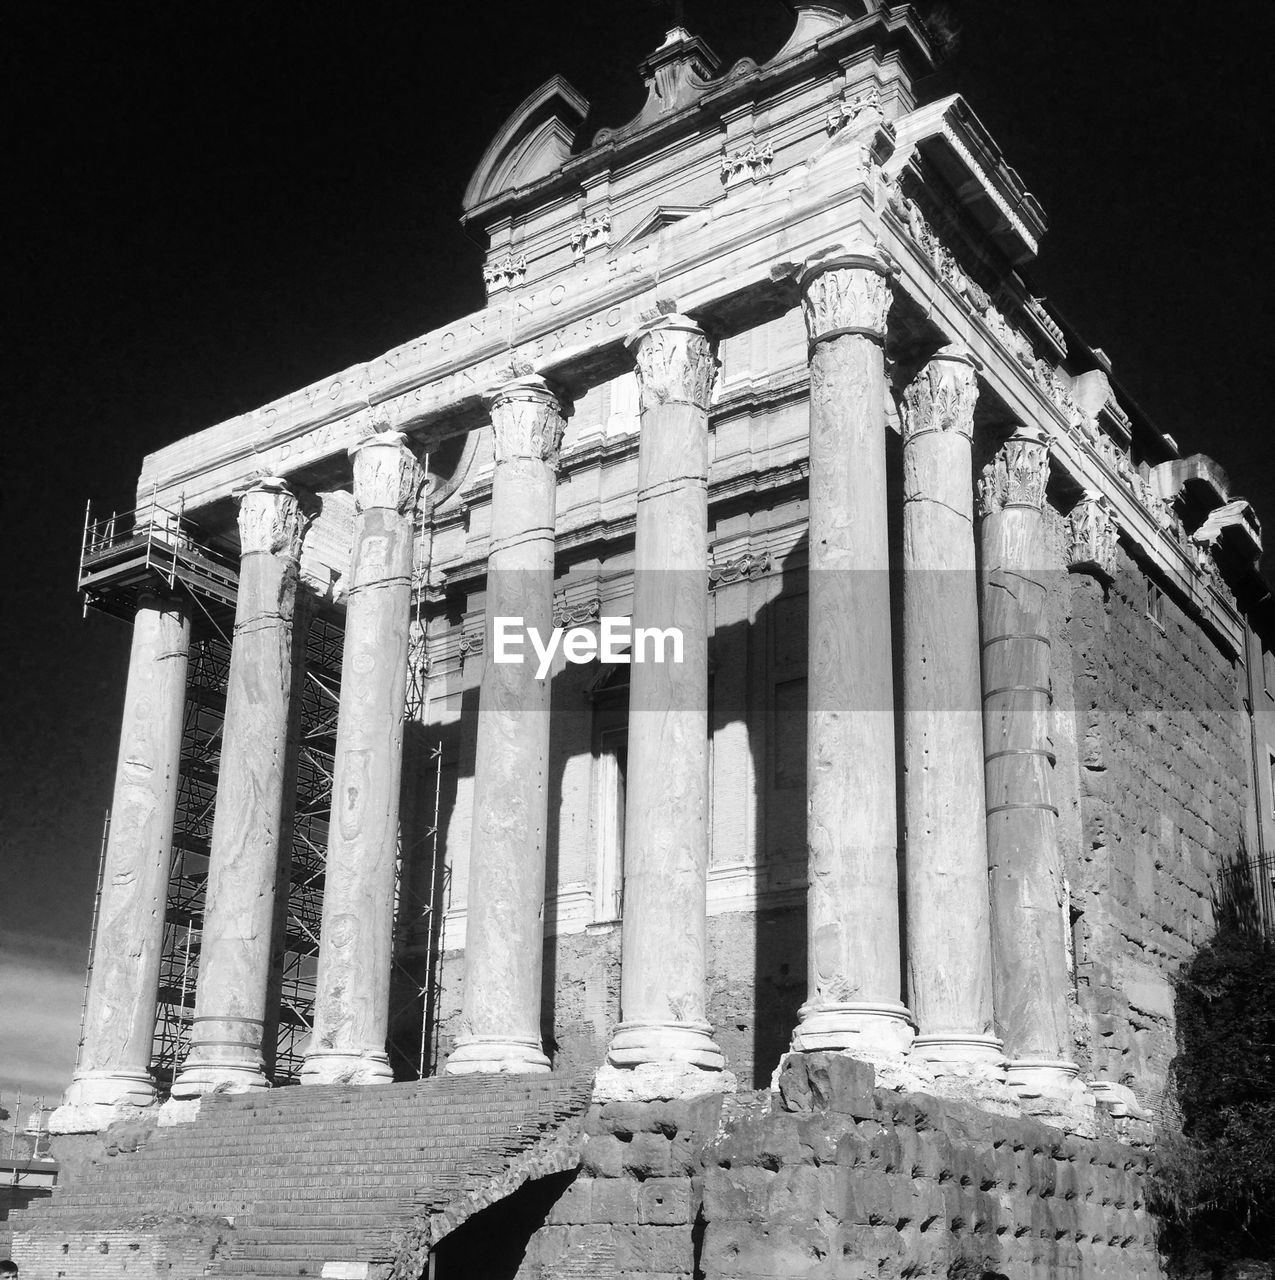 Temple of antoninus and faustina